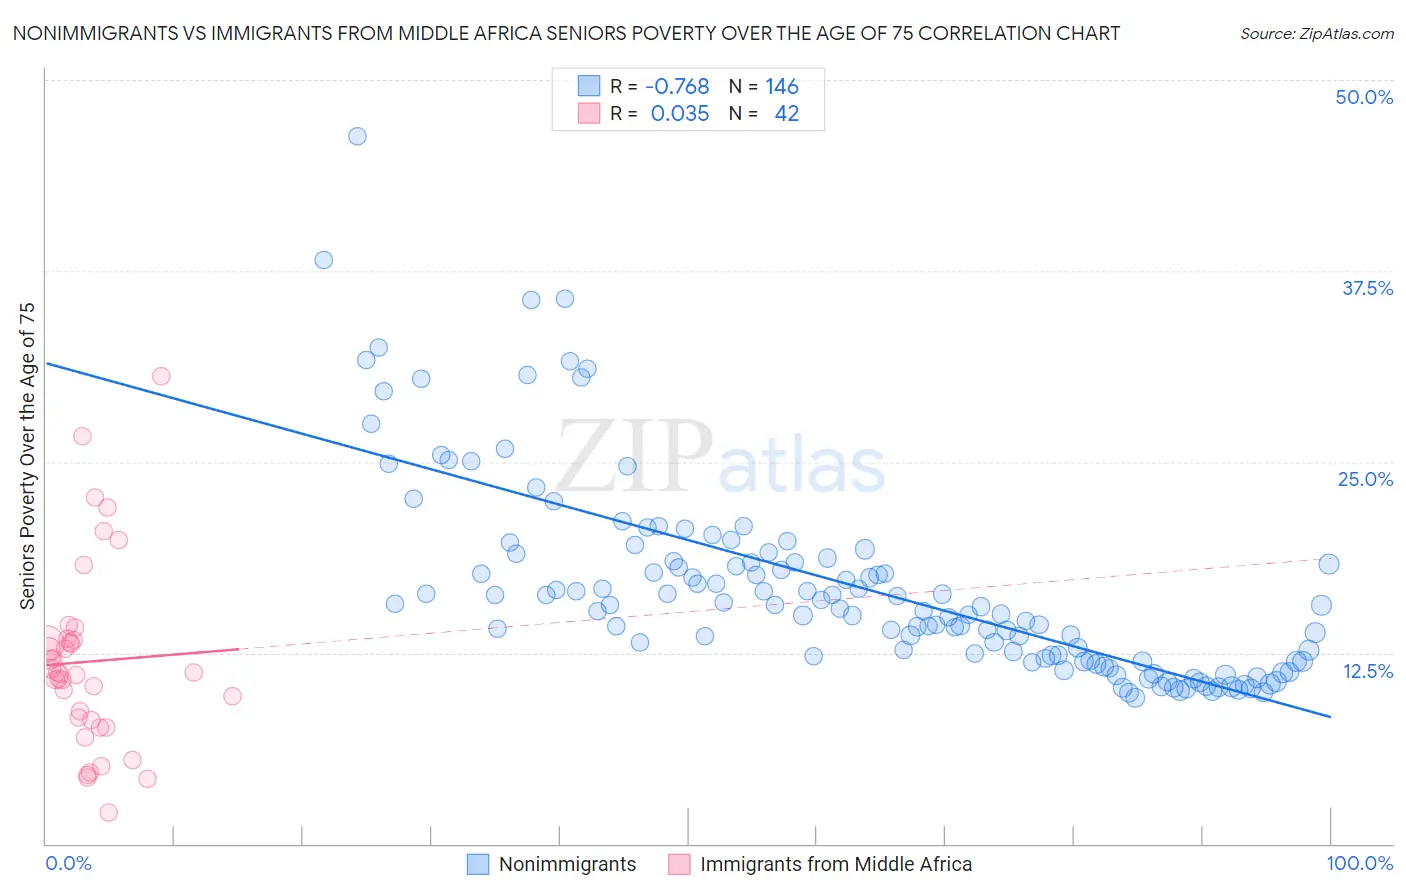 Nonimmigrants vs Immigrants from Middle Africa Seniors Poverty Over the Age of 75